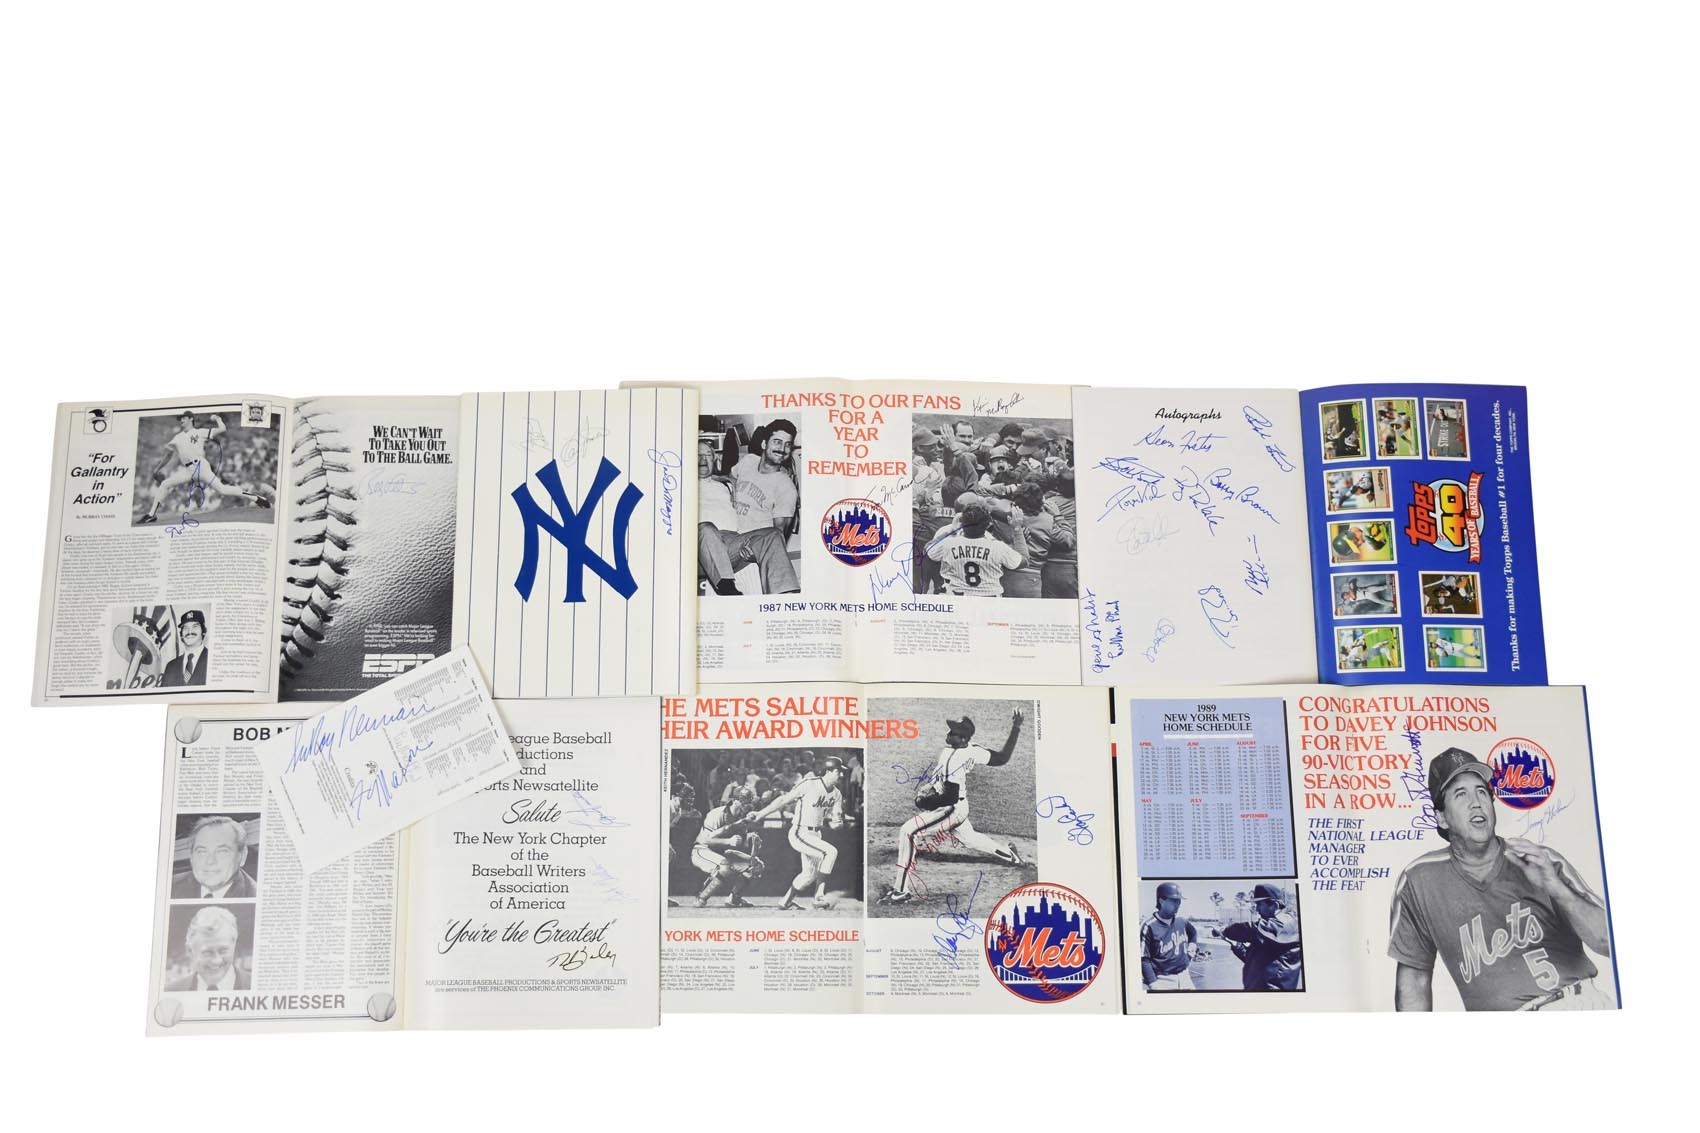 - 1980s-90s Baseball Writers Signed Programs Obtained by Attendee (137 Signatures)